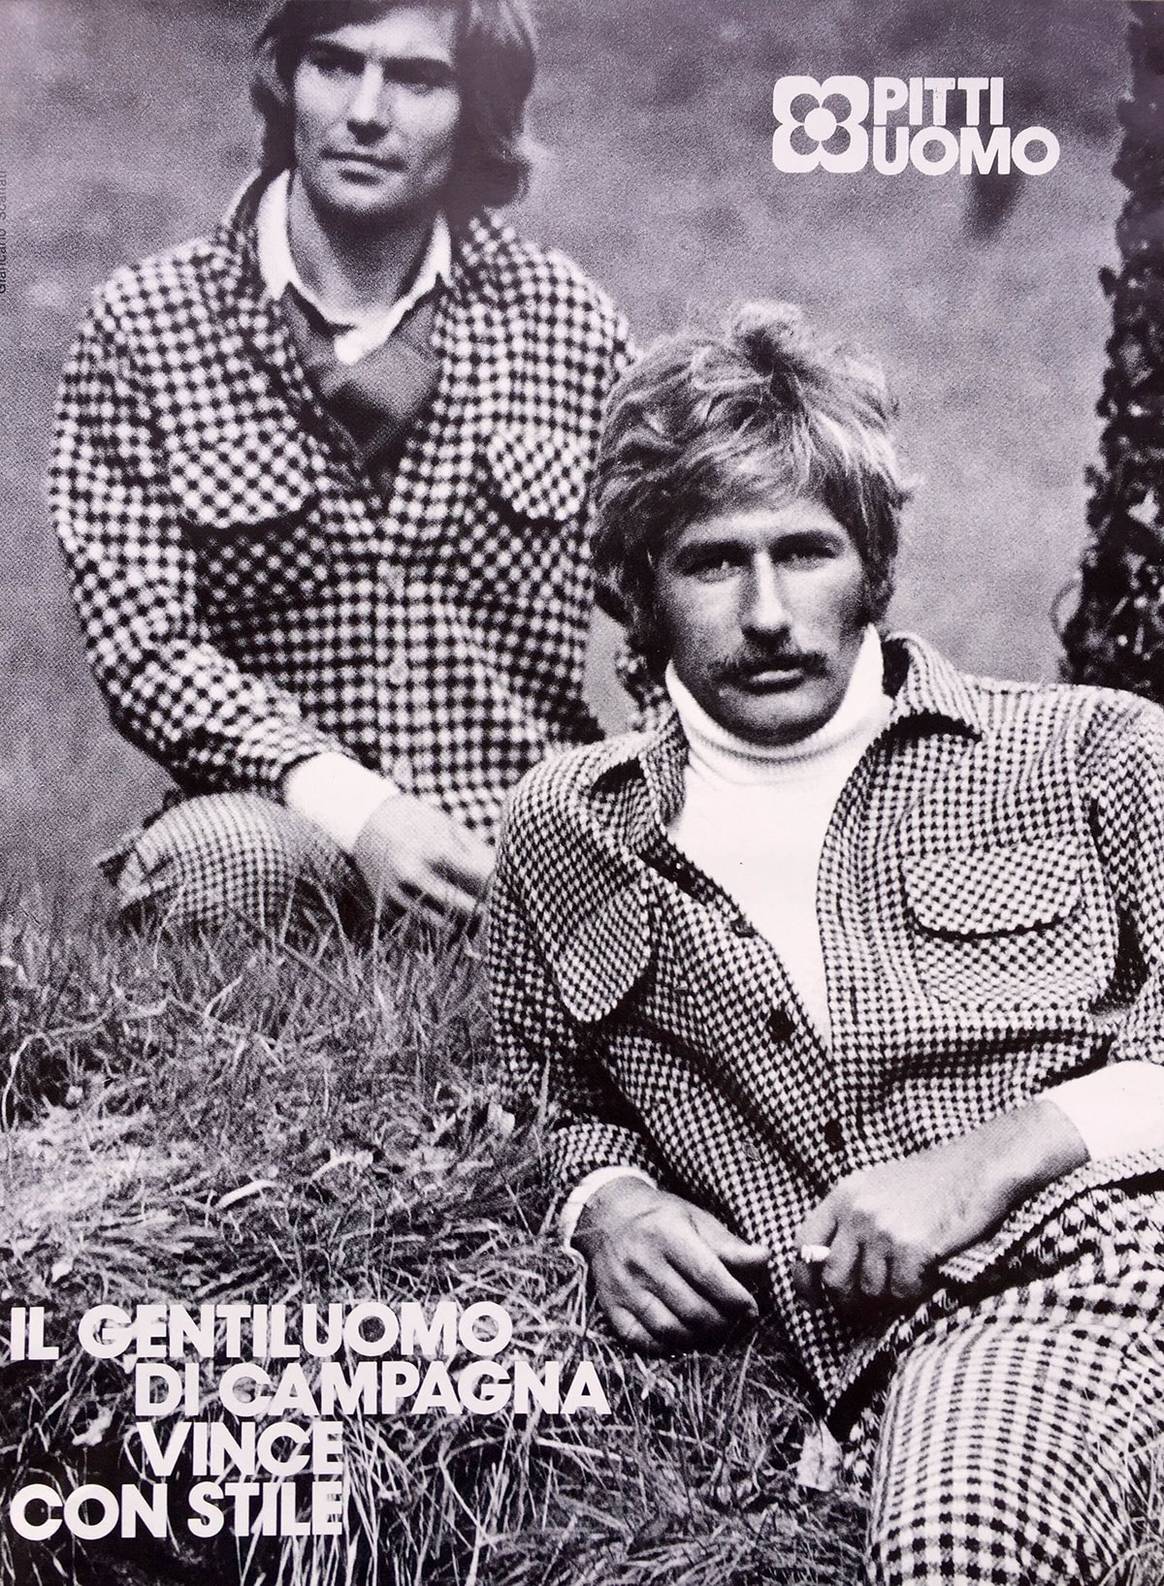 Promotional image from the very first Pitti Uomo edition in 1972